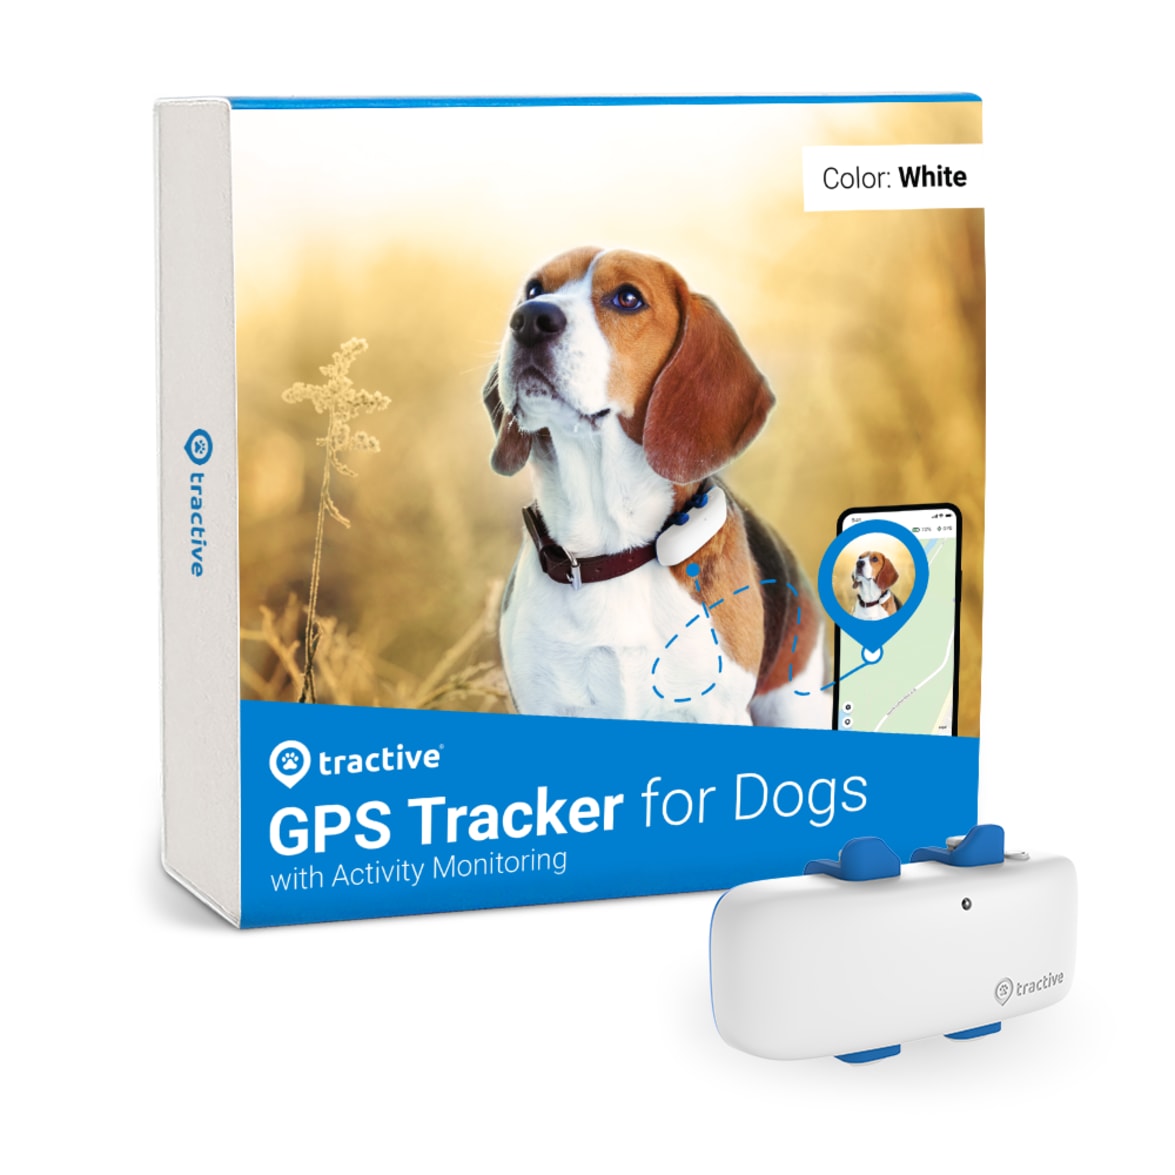 Emballasje for Tractive GPS DOG 4